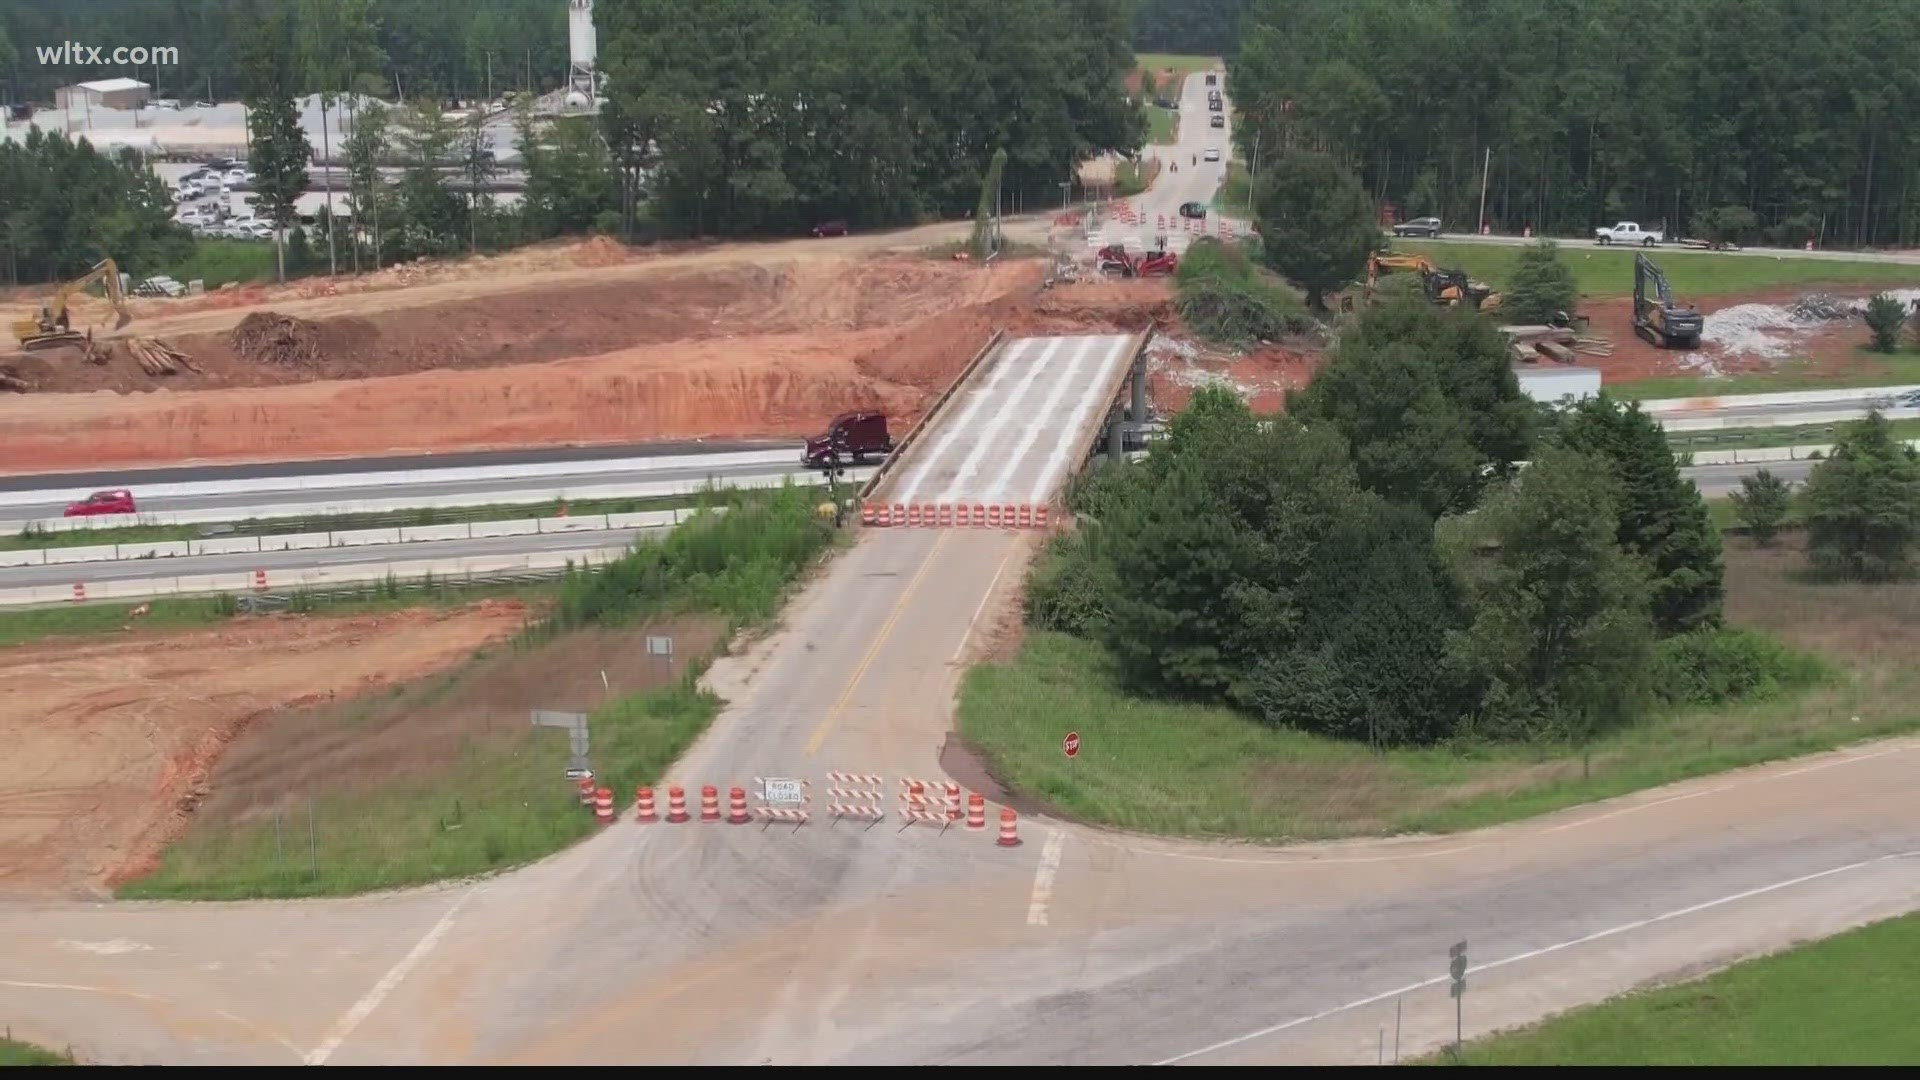 Exit 91's new bridge is finished and road widening and paving of the overpass is still underway. 
They say exit 97's bridge is partially open